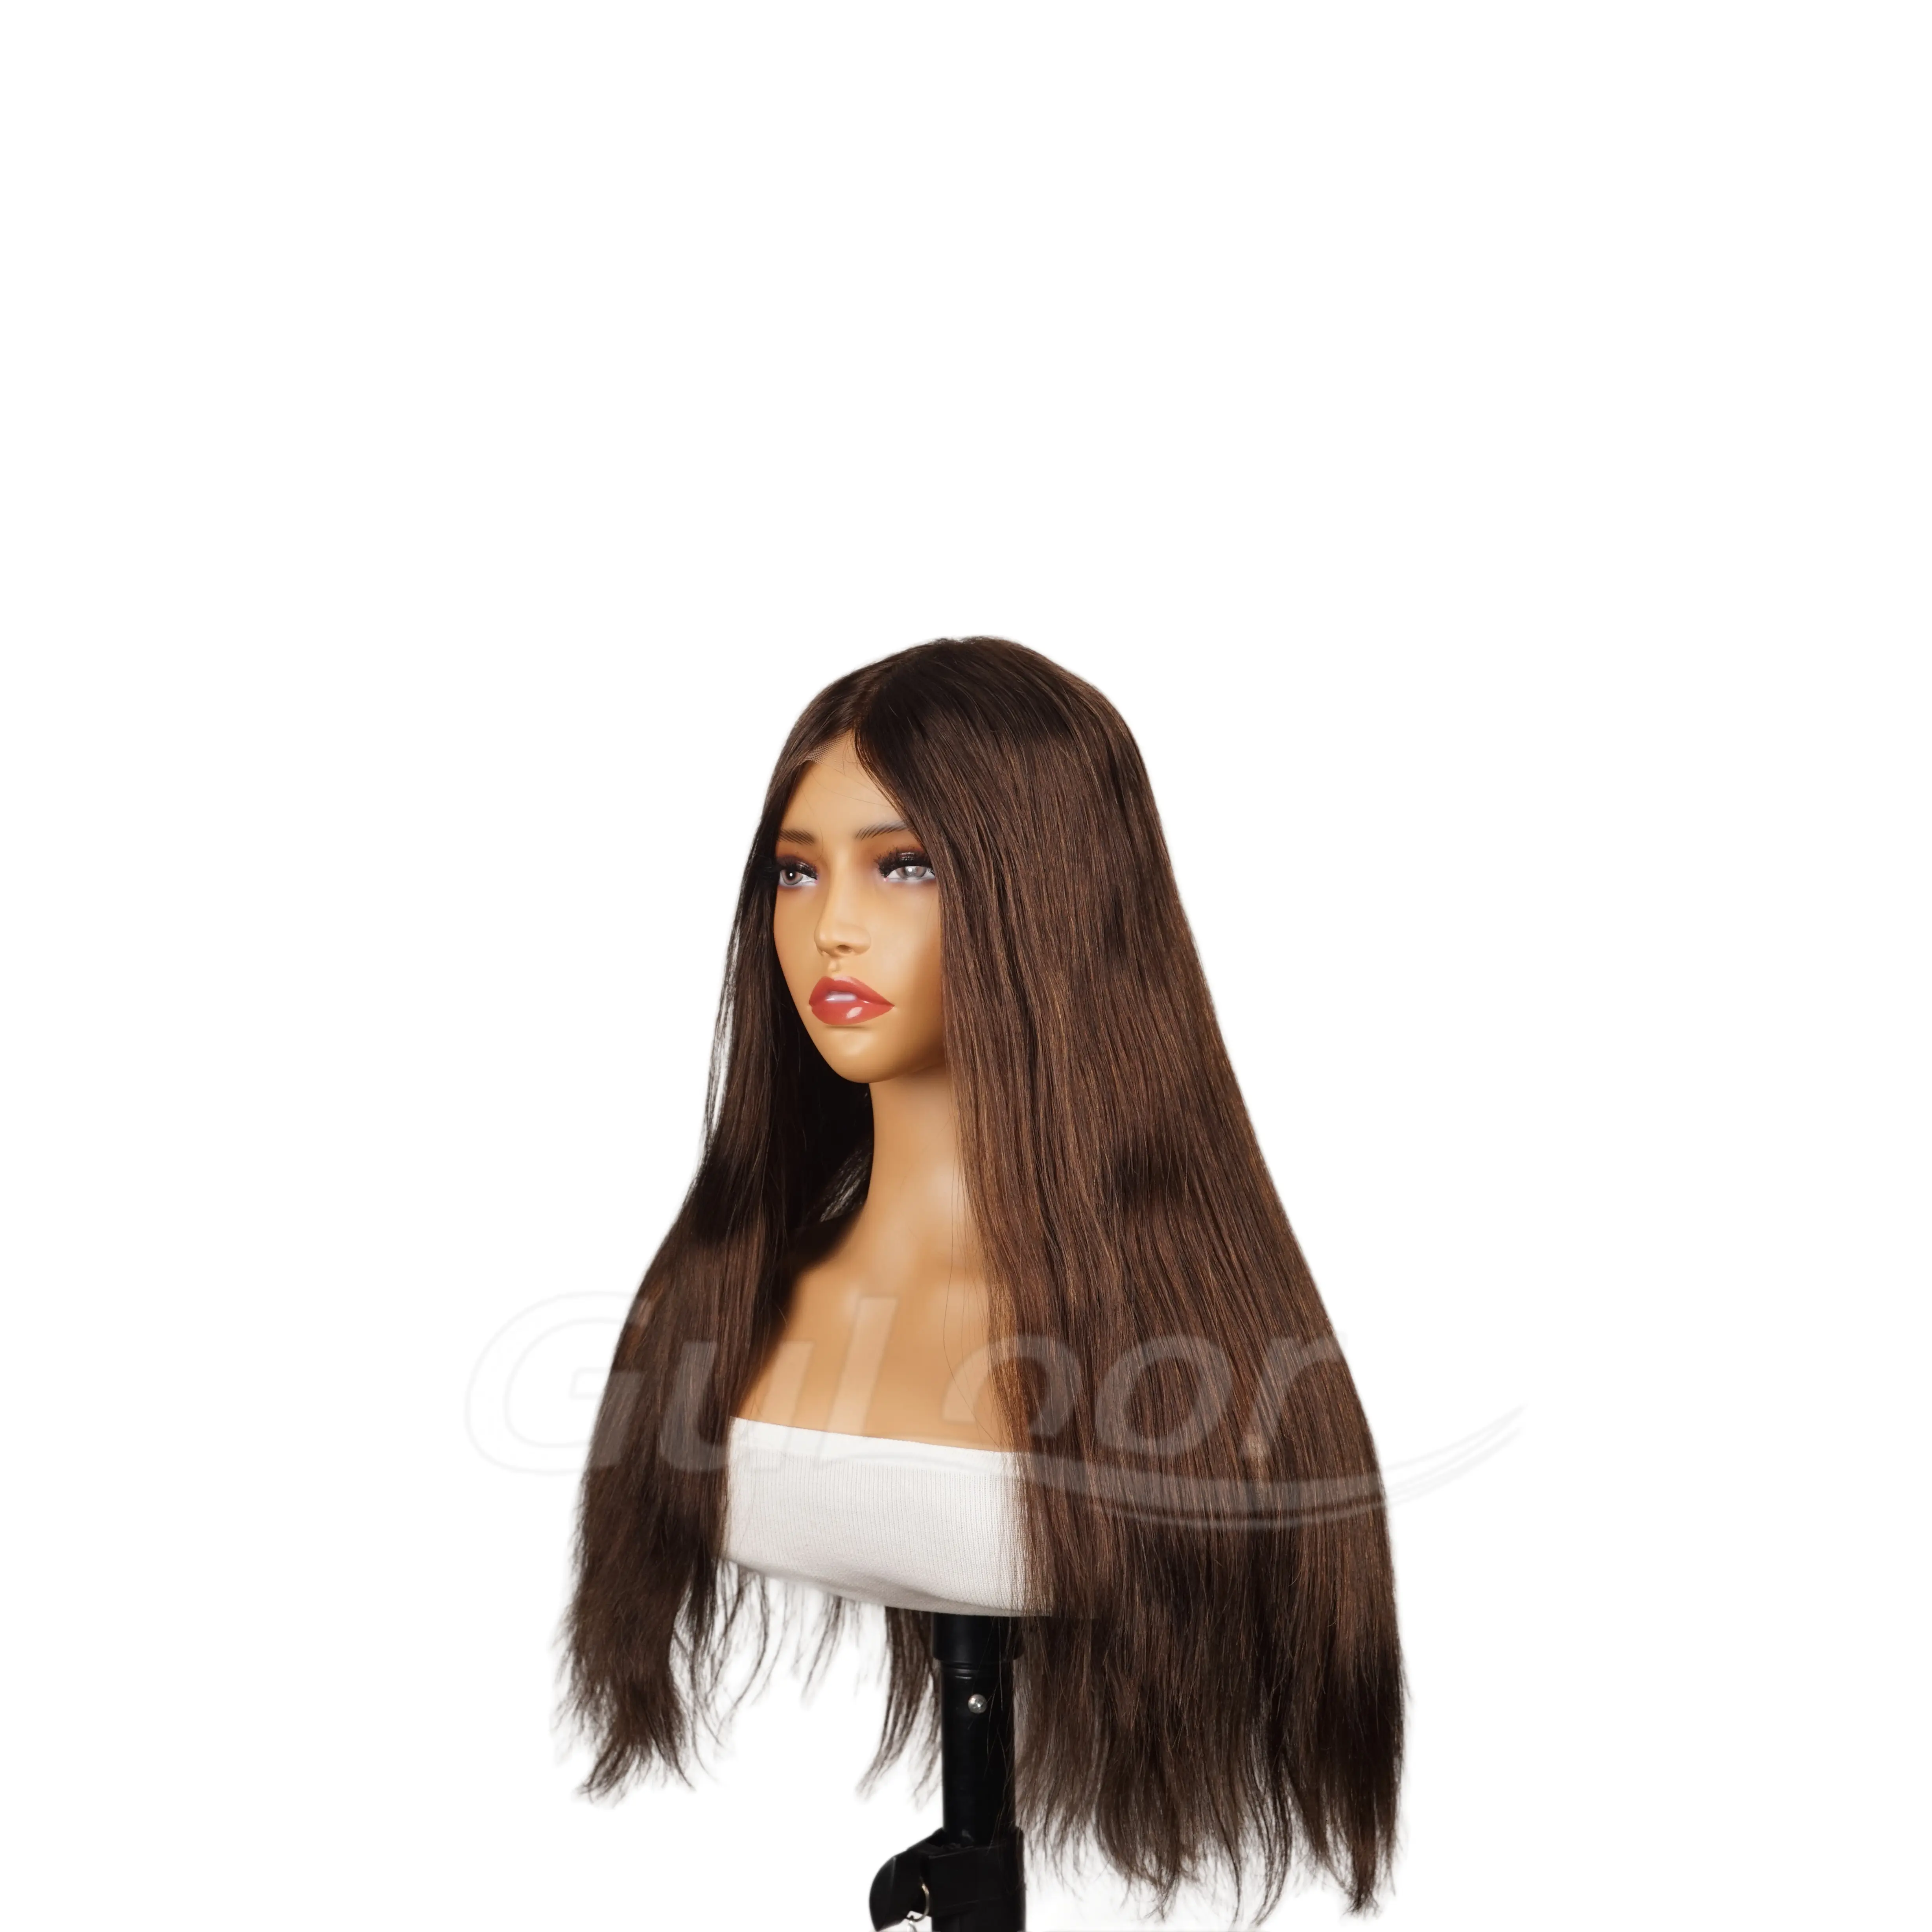 T-part lace wigs color #4 hair length 24inches